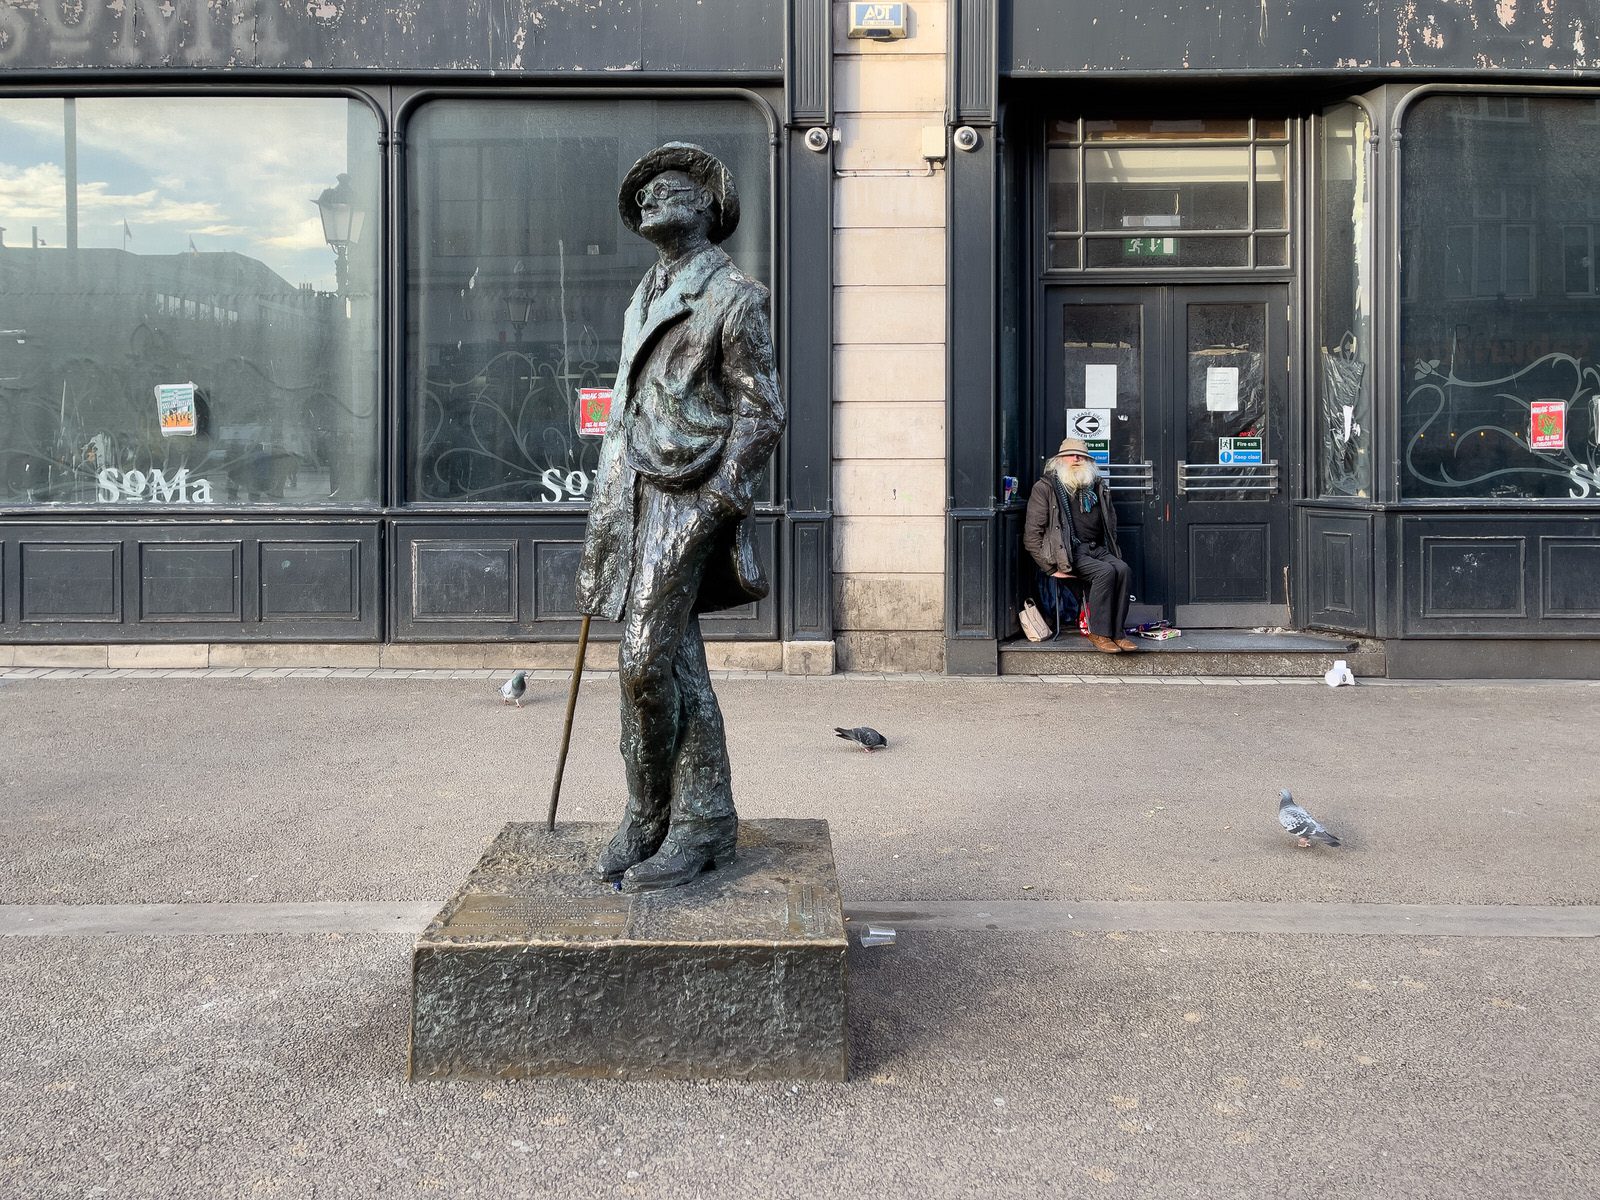 JAMES JOYCE STATUE BY MAJORIE FITZGIBBON [THE STATUE ITSELF HAS ATTRACTED A SOMEWHAT RUDE NICKNAME]-223039-1